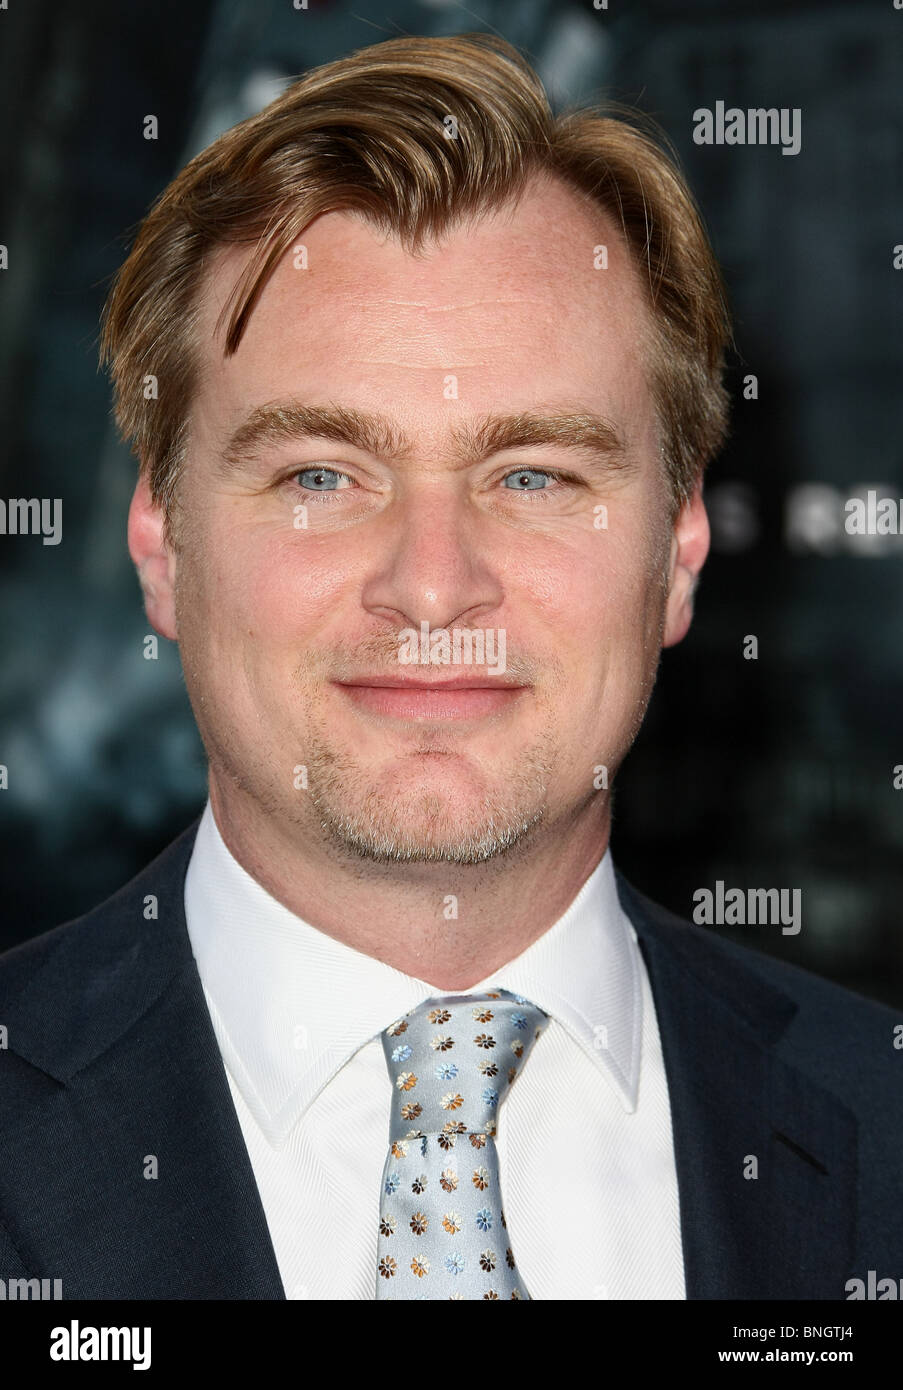 CHRISTOPHER NOLAN INCEPTION LOS ANGELES PREMIERE LOS ANGELES CALIFORNIA USA 13 July 2010 Stock Photo